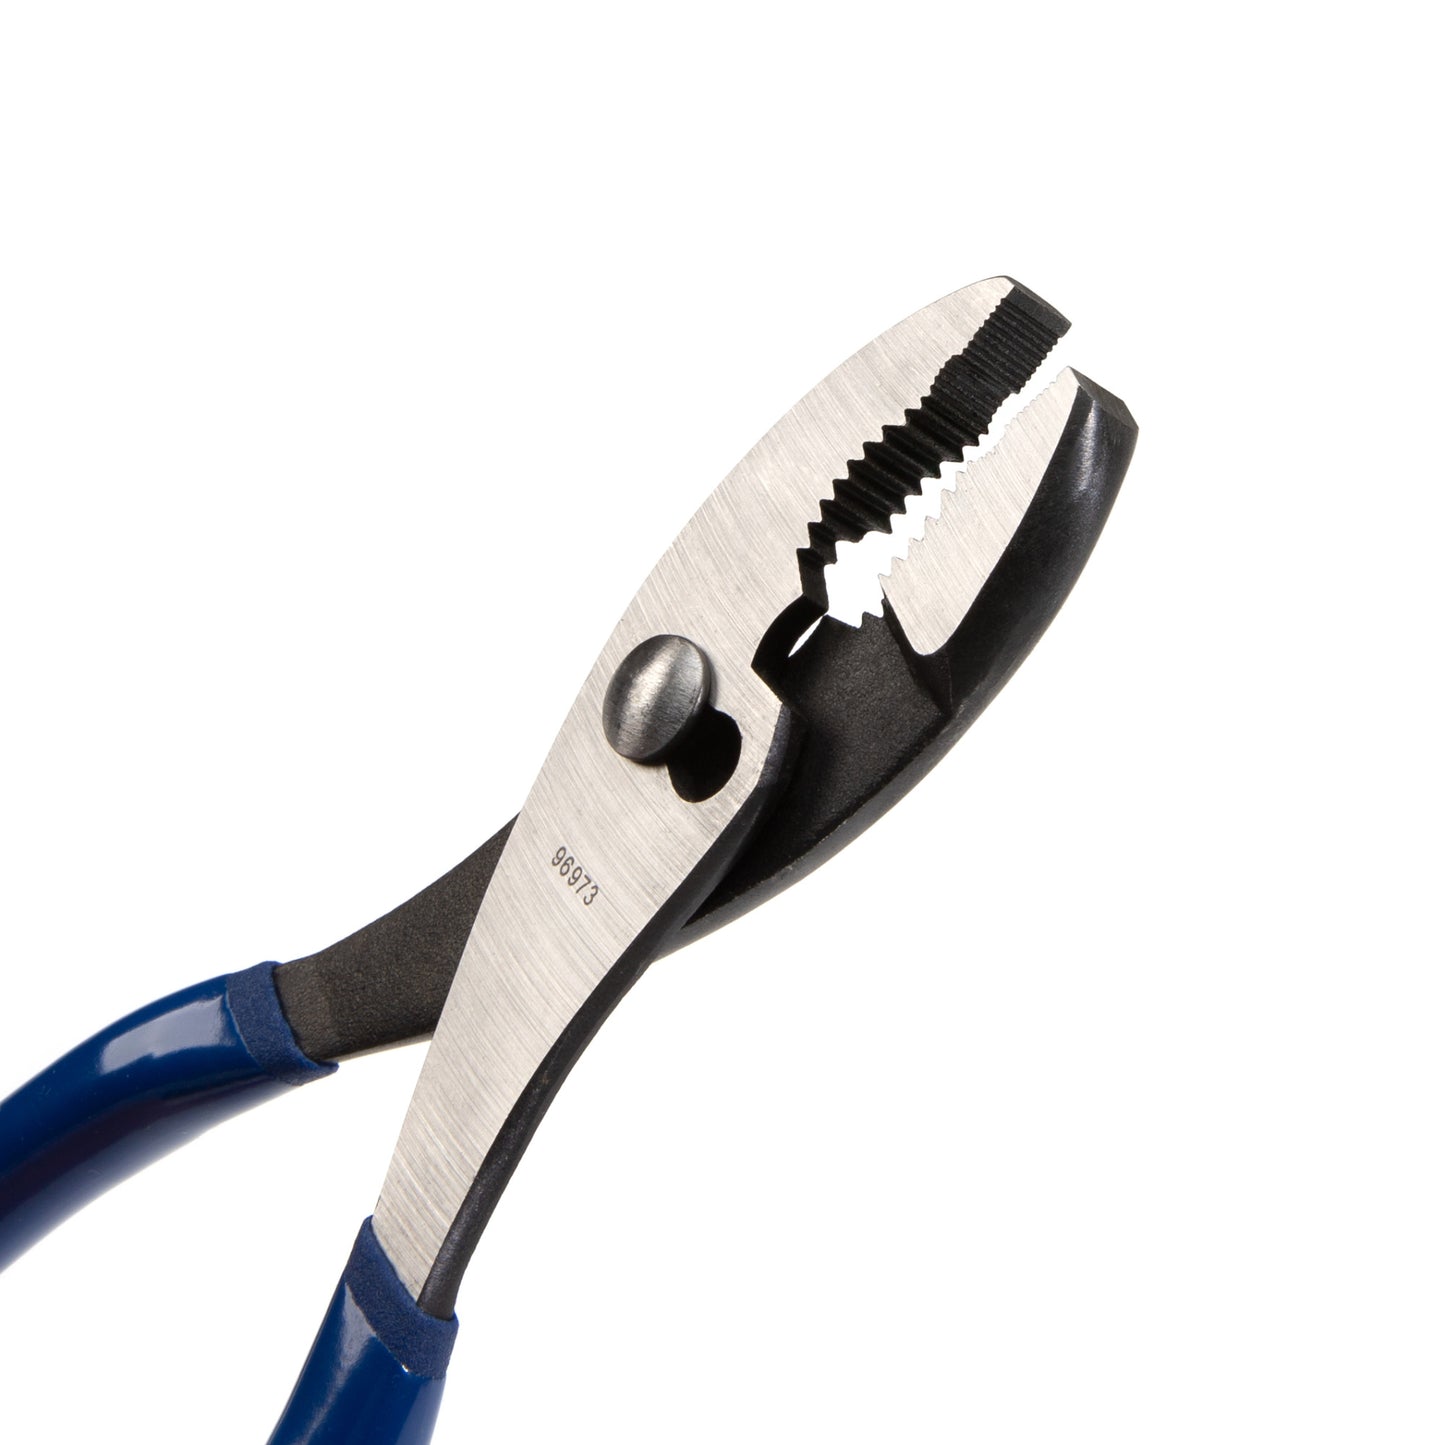 8-Inch Long Slip-Joint Pliers with Wire Cutter and Dual Layer Blue Grip